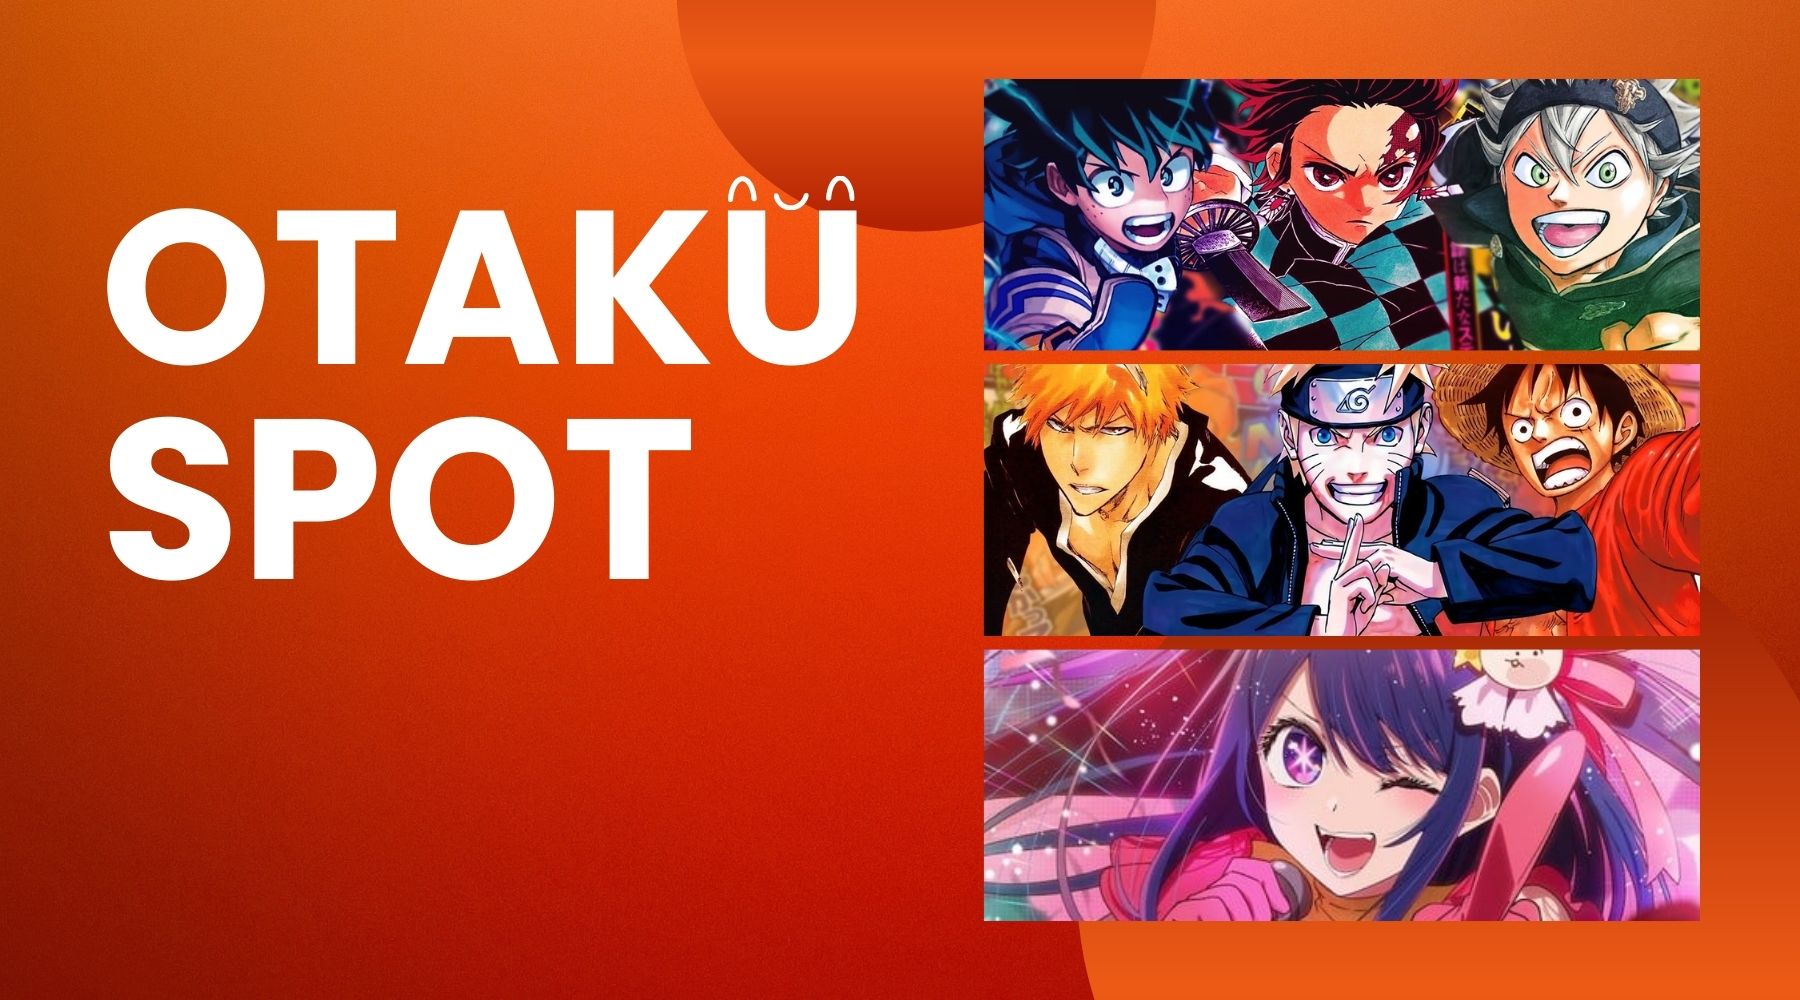 Get Hooked on These 5 Engaging Anime Podcasts